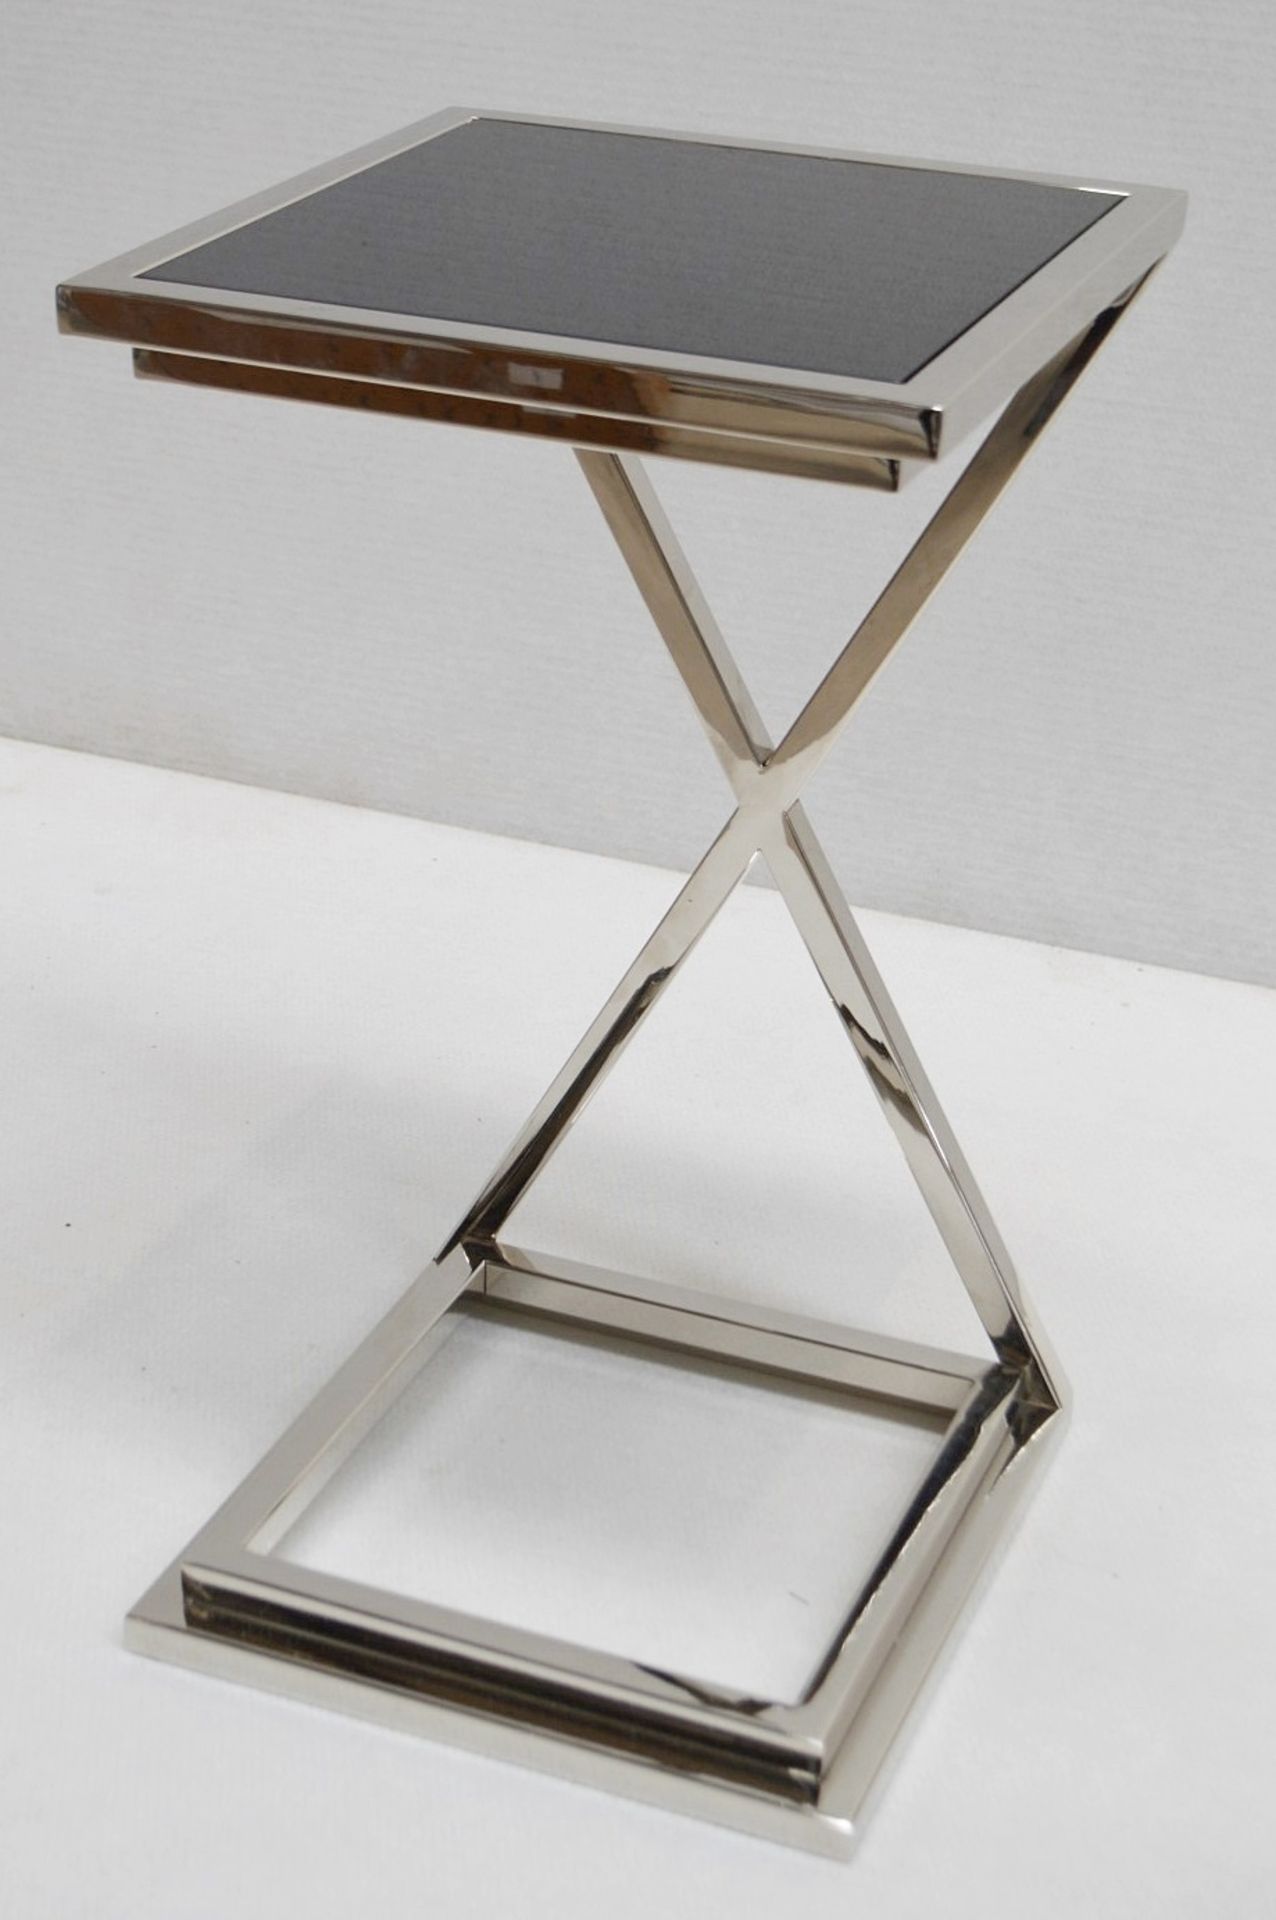 1 x EICHHOLTZ Cross Nickel Side Table With A Smoked Glass Top - Original RRP £260.00 - Image 5 of 8